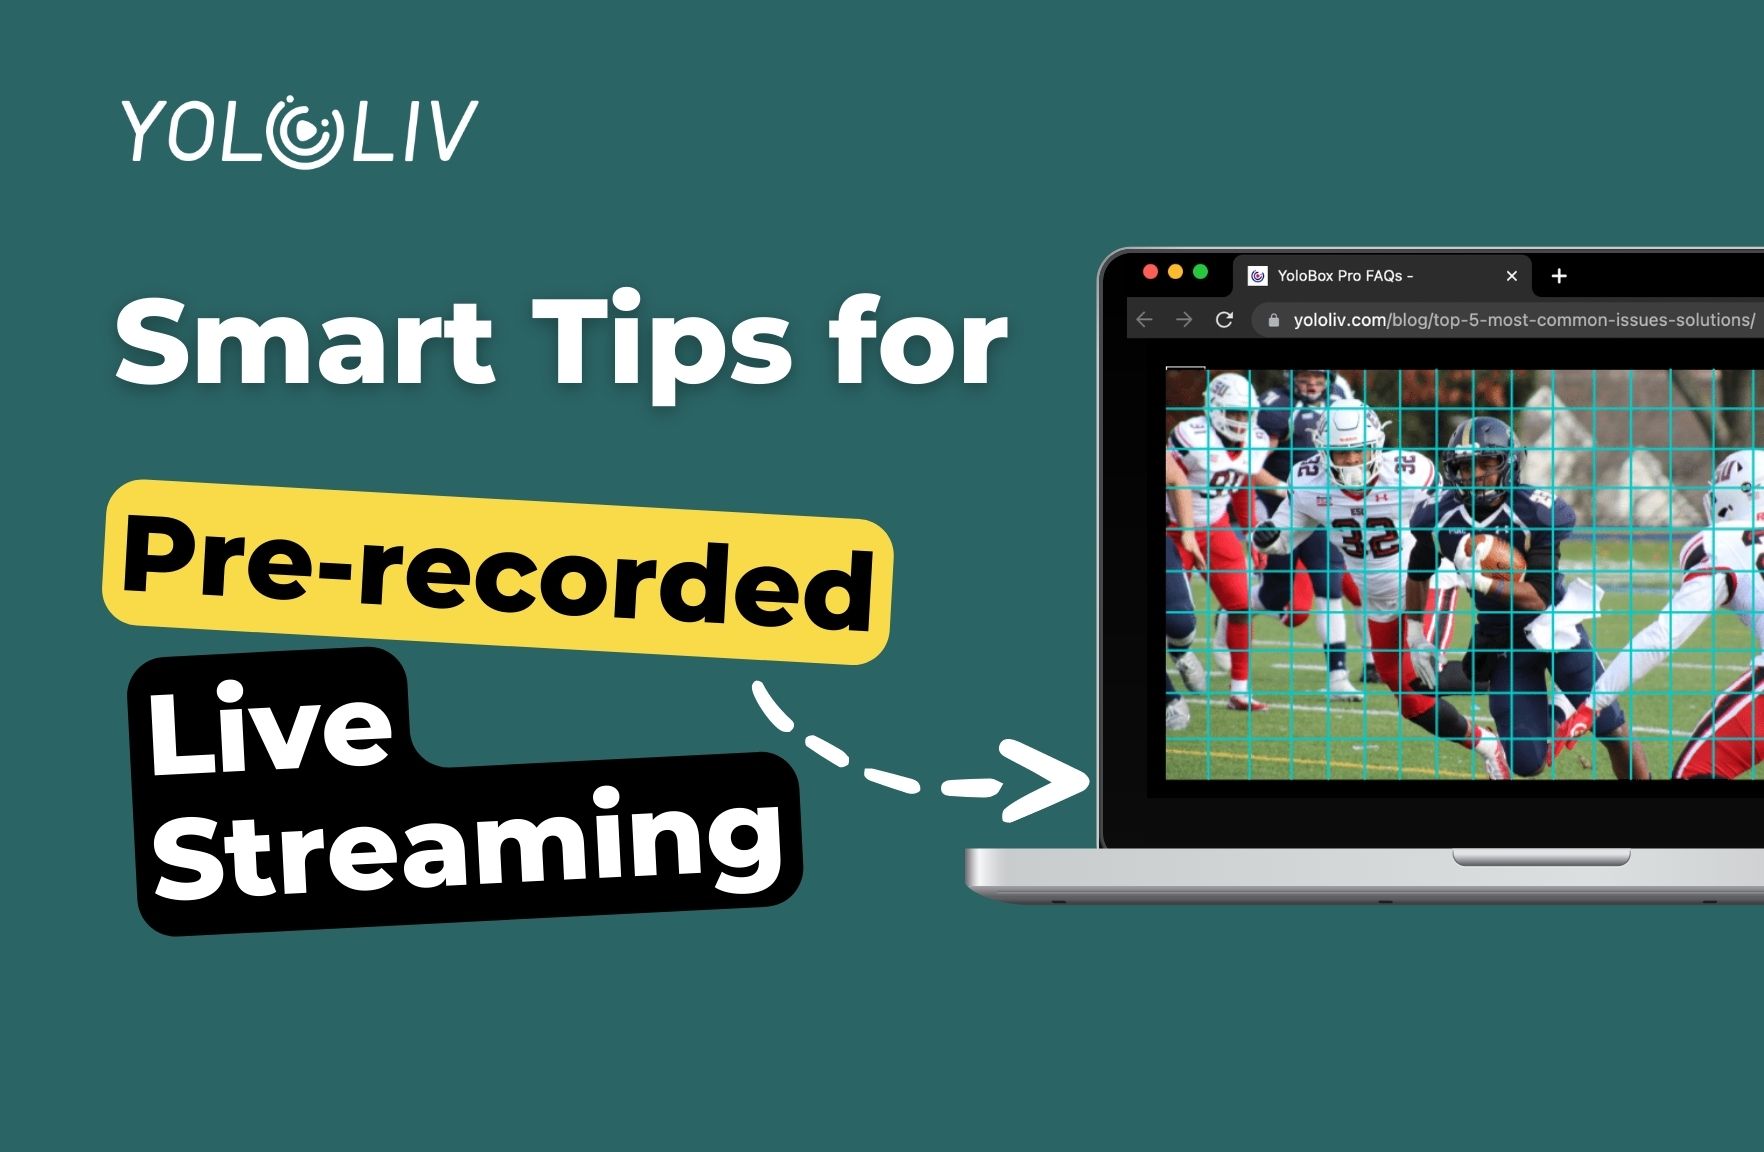 Smart Tips for Pre-recorded Live Streaming